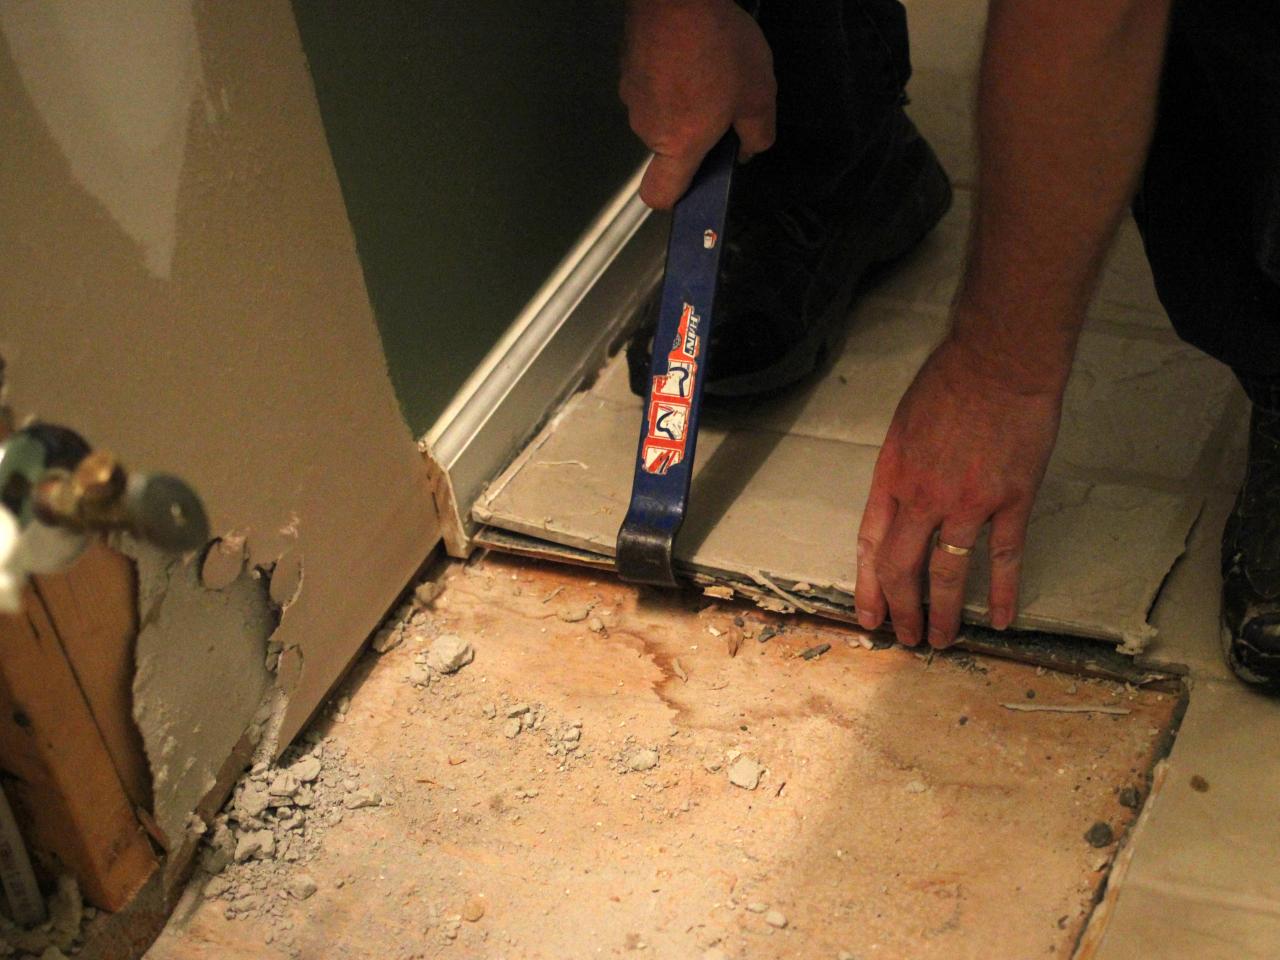 How To Remove A Tile Floor Tos Diy, Replacing Tile In Bathroom